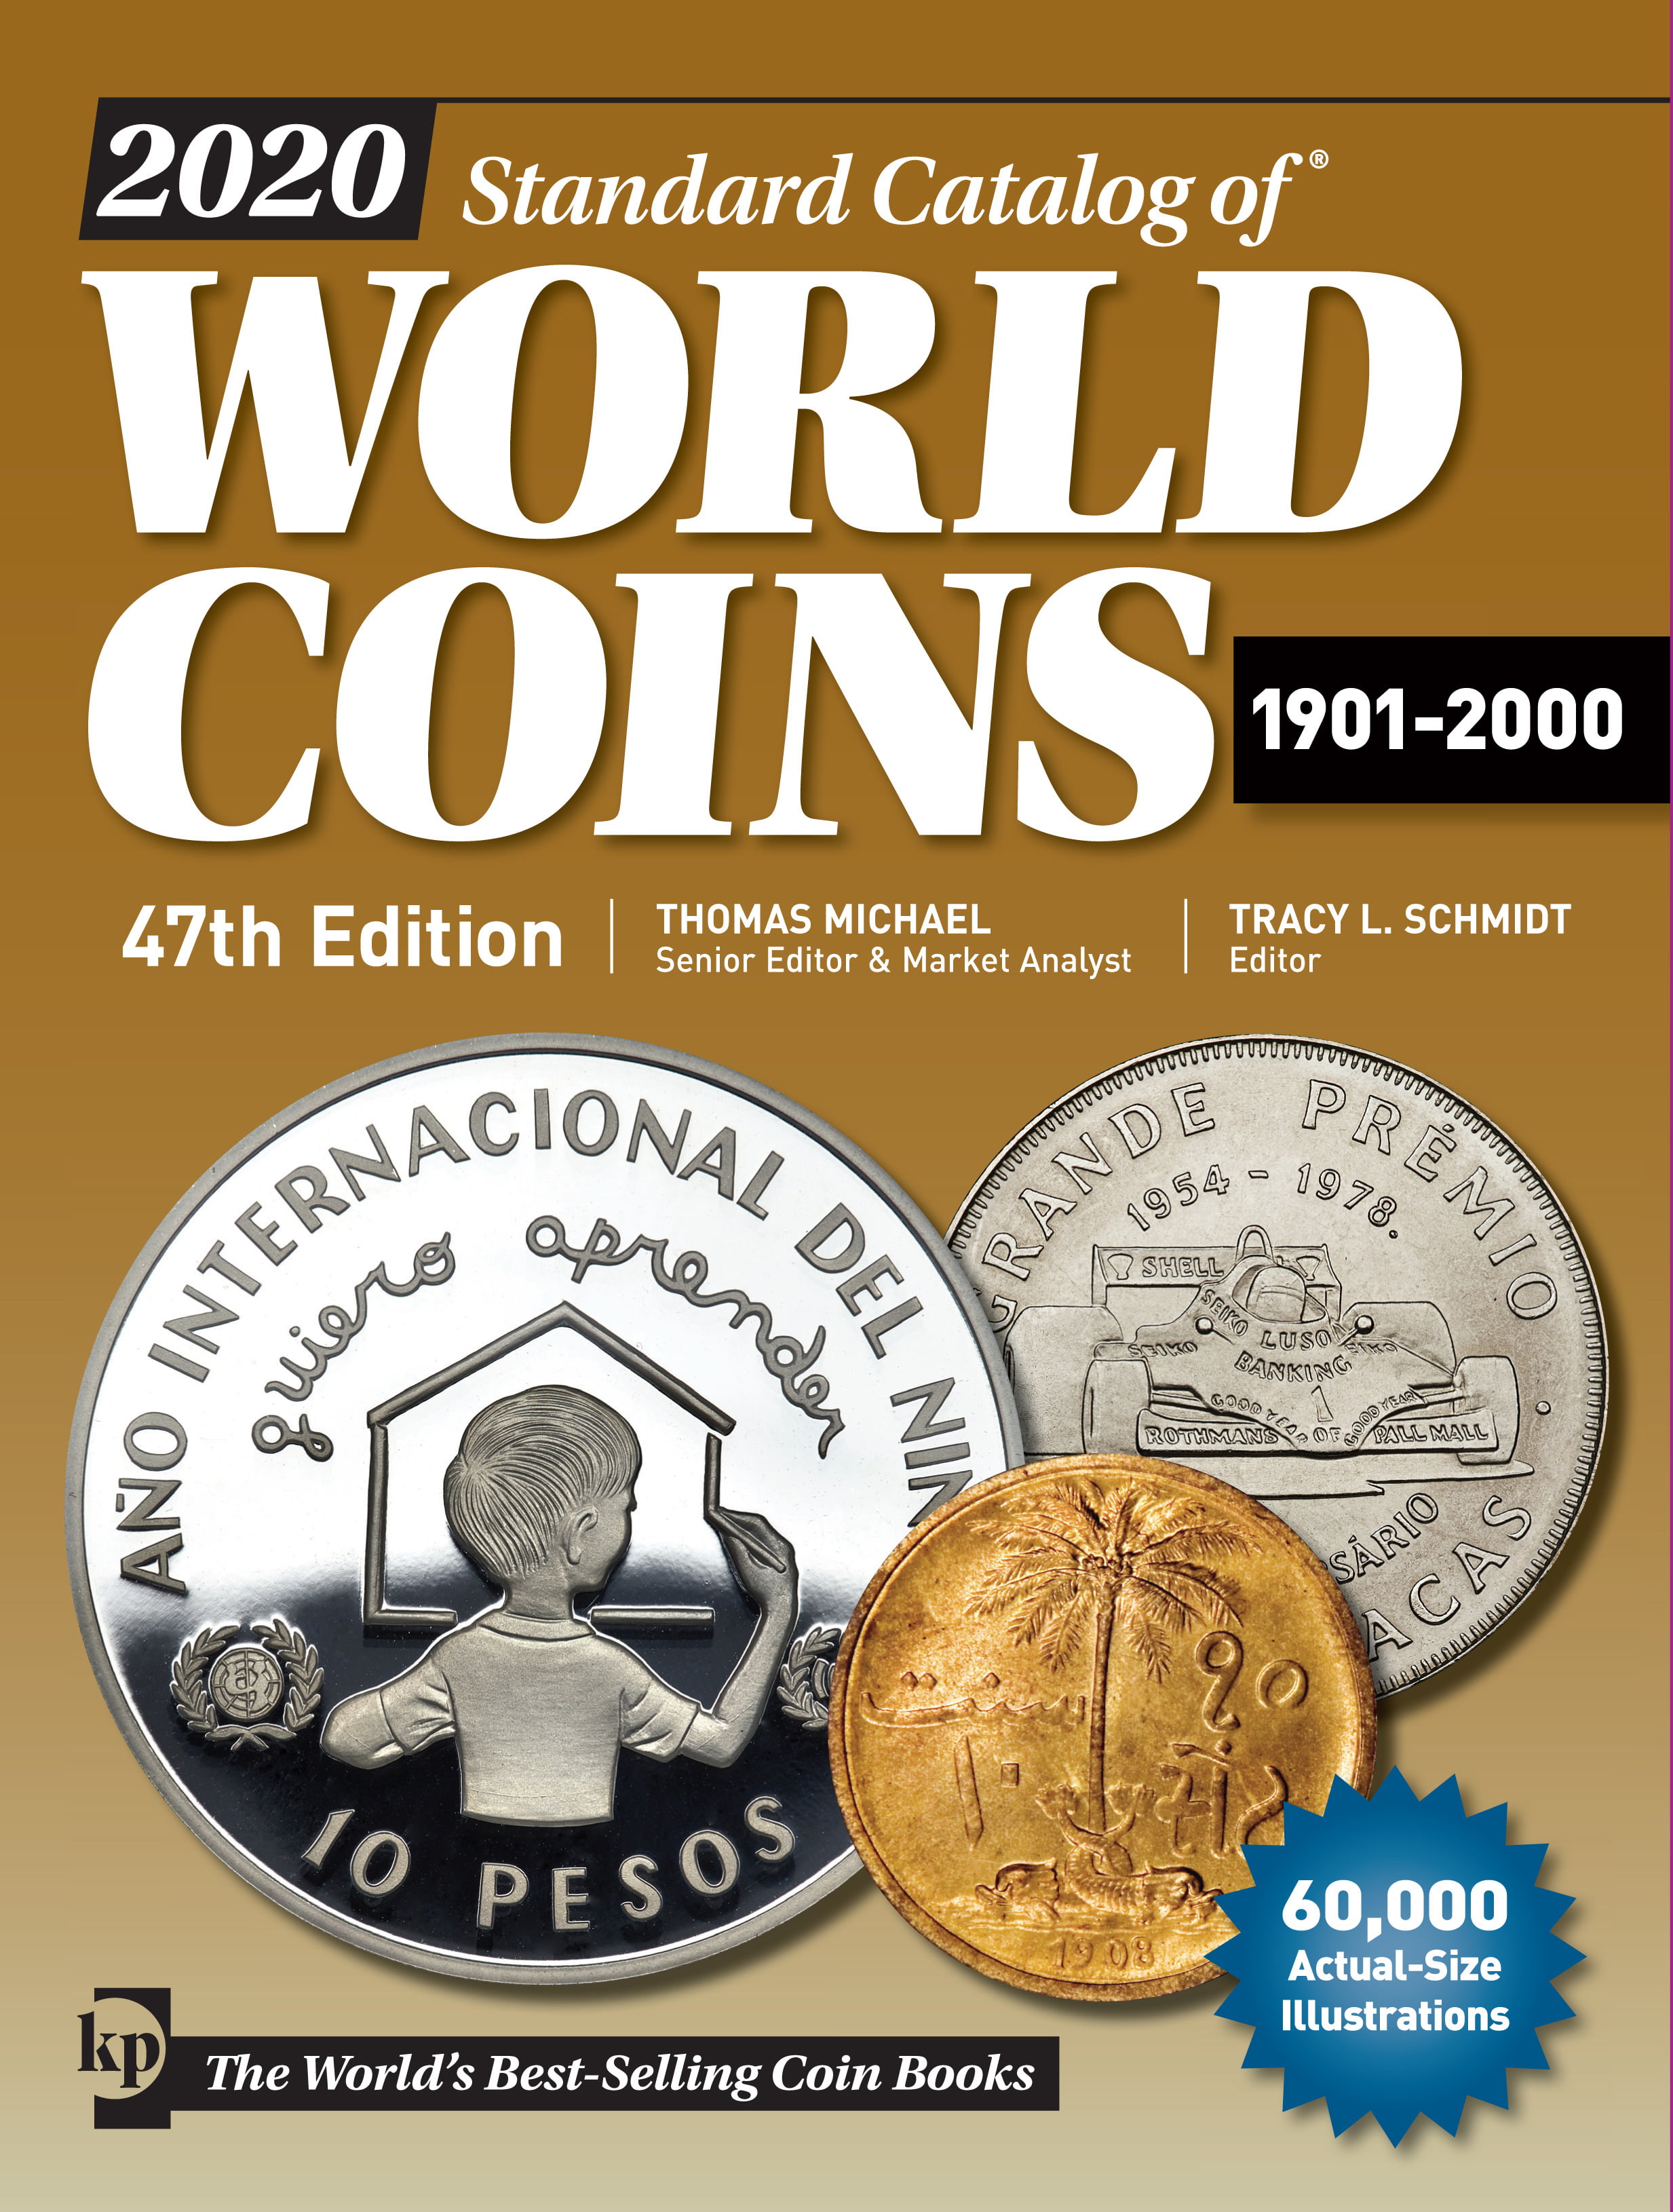 2016 Standard Catalog of World Coins 1901-2000 by Krause Publications 